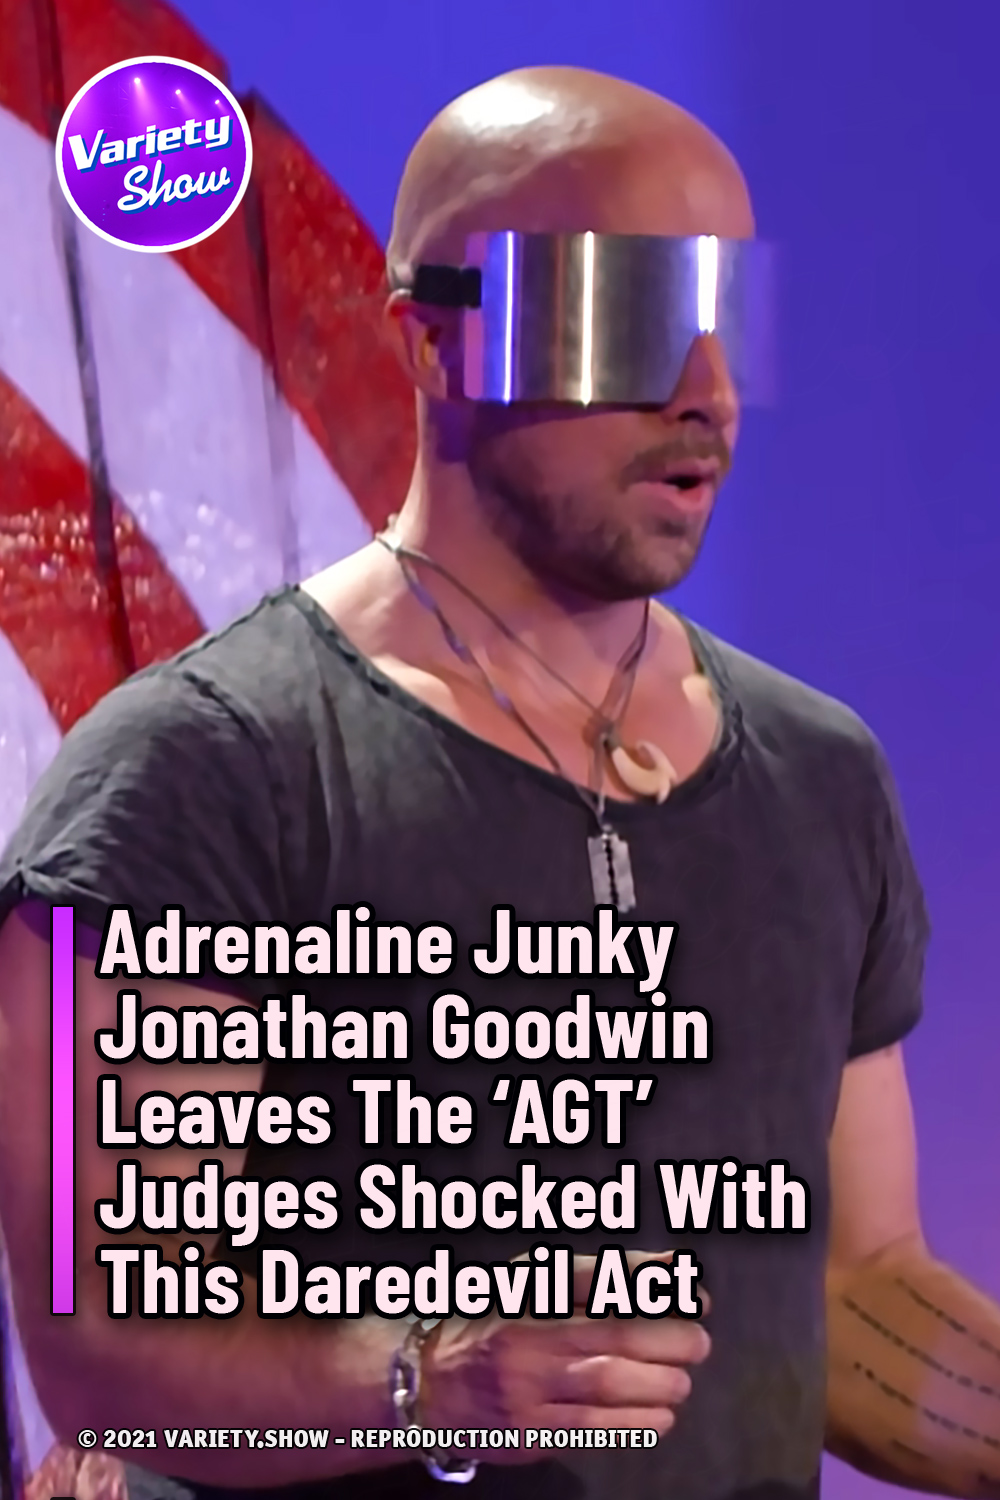 Adrenaline Junky Jonathan Goodwin Leaves The ‘AGT’ Judges Shocked With This Daredevil Act